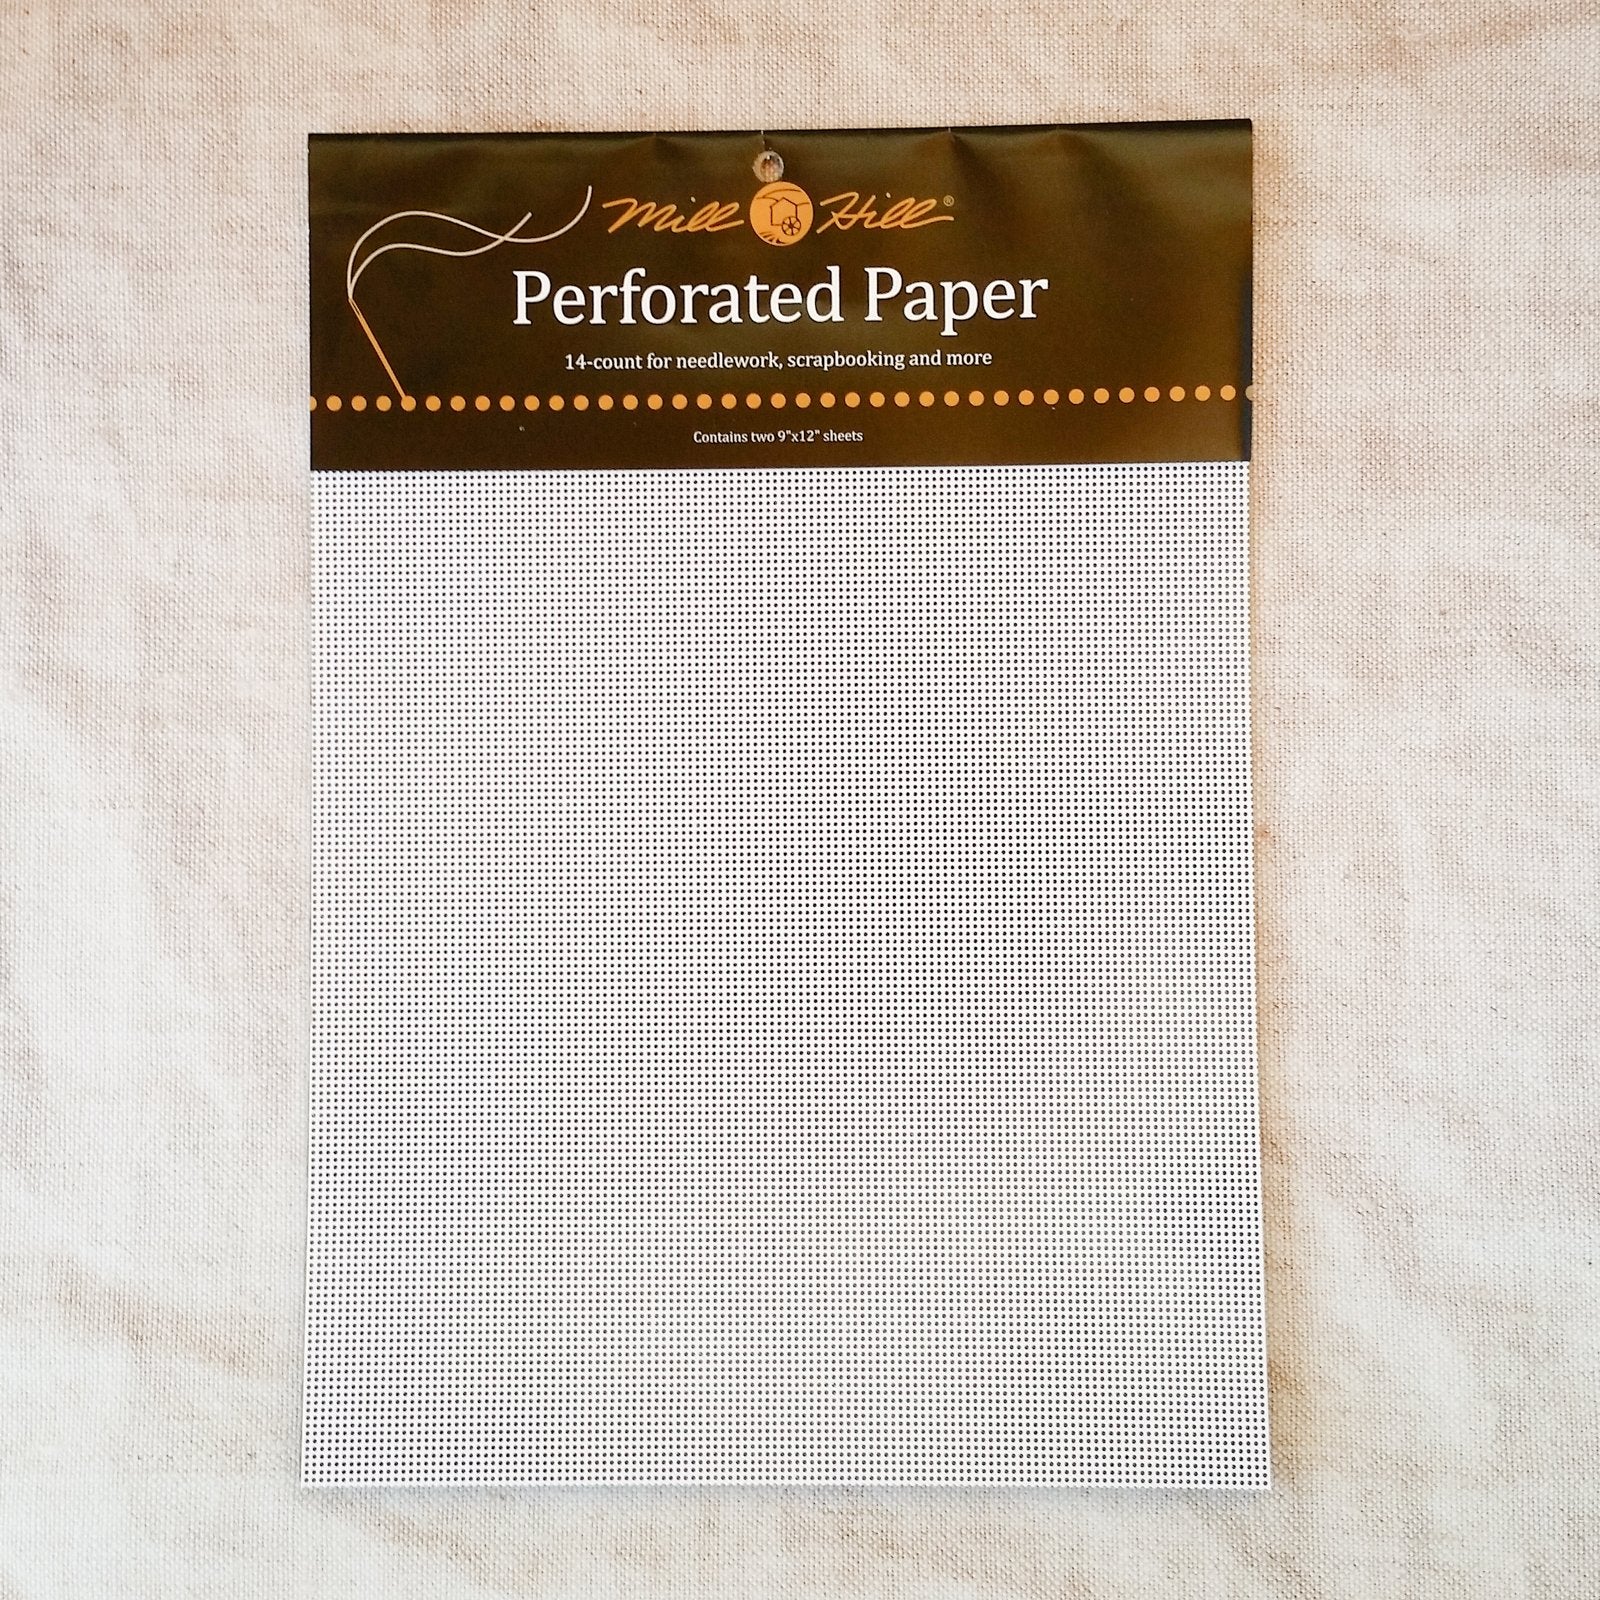 White Cardboard Sheets - Scrapbooking, Crafting, Shipping - Many Sizes